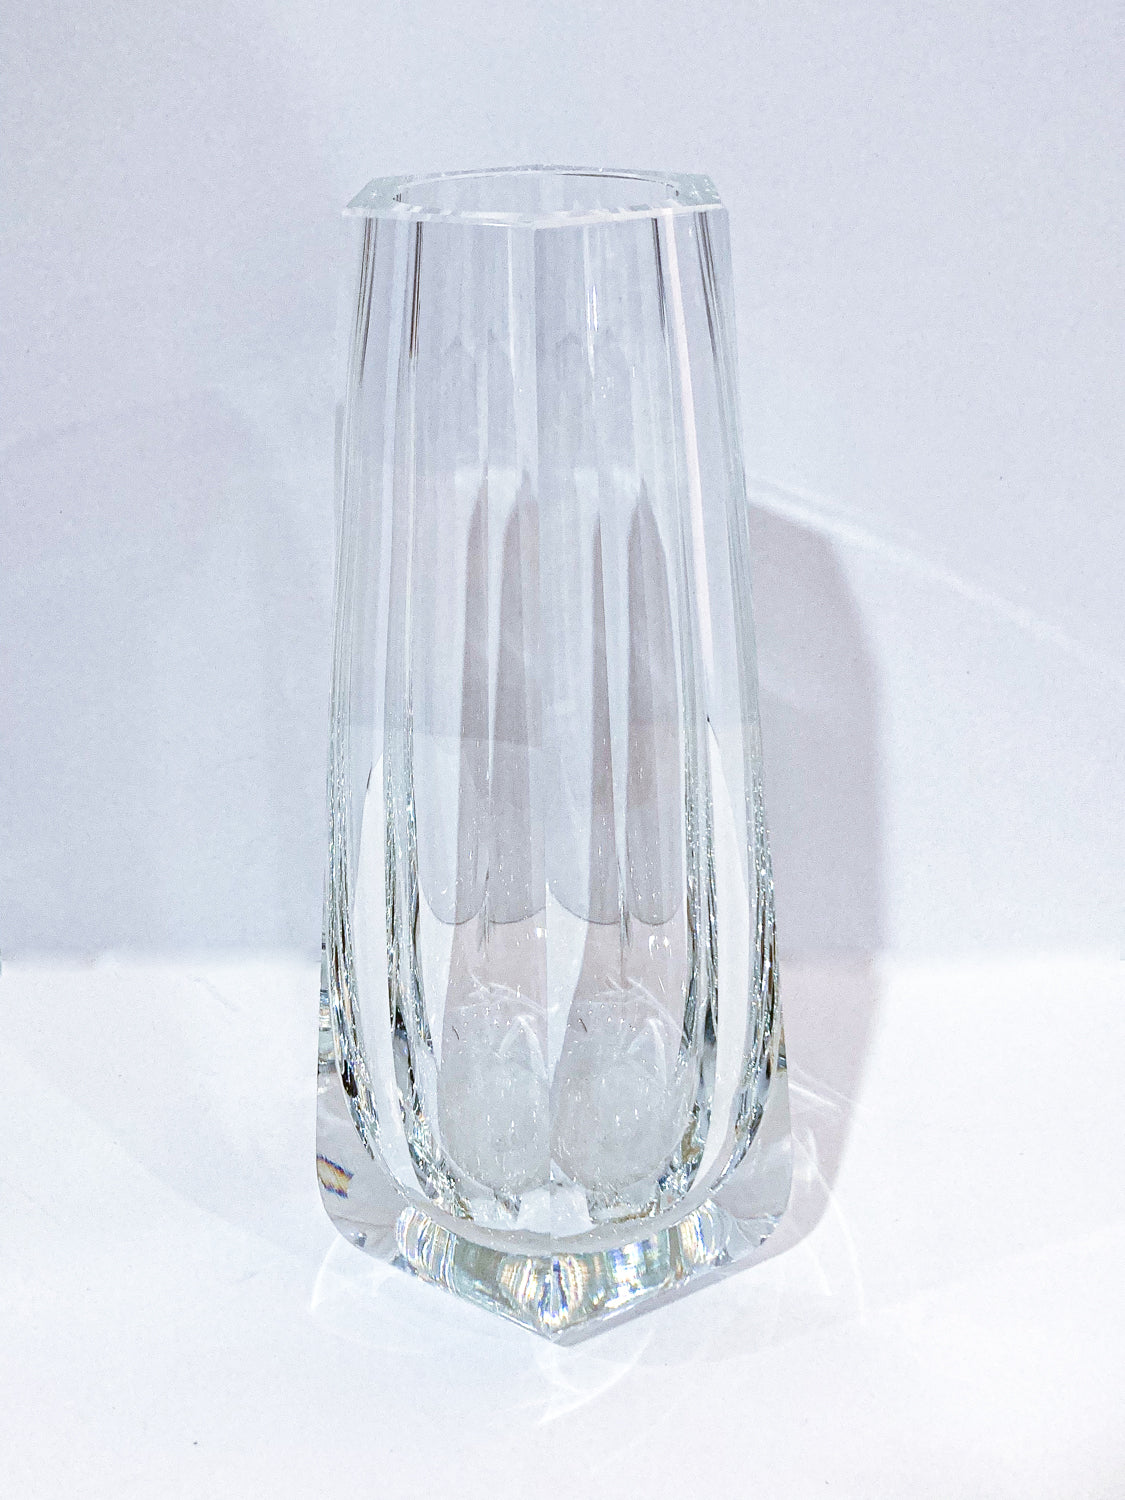 Gorgeous Geometric Flared Form Clear Moser Crystal Tall Tapered Vase 1